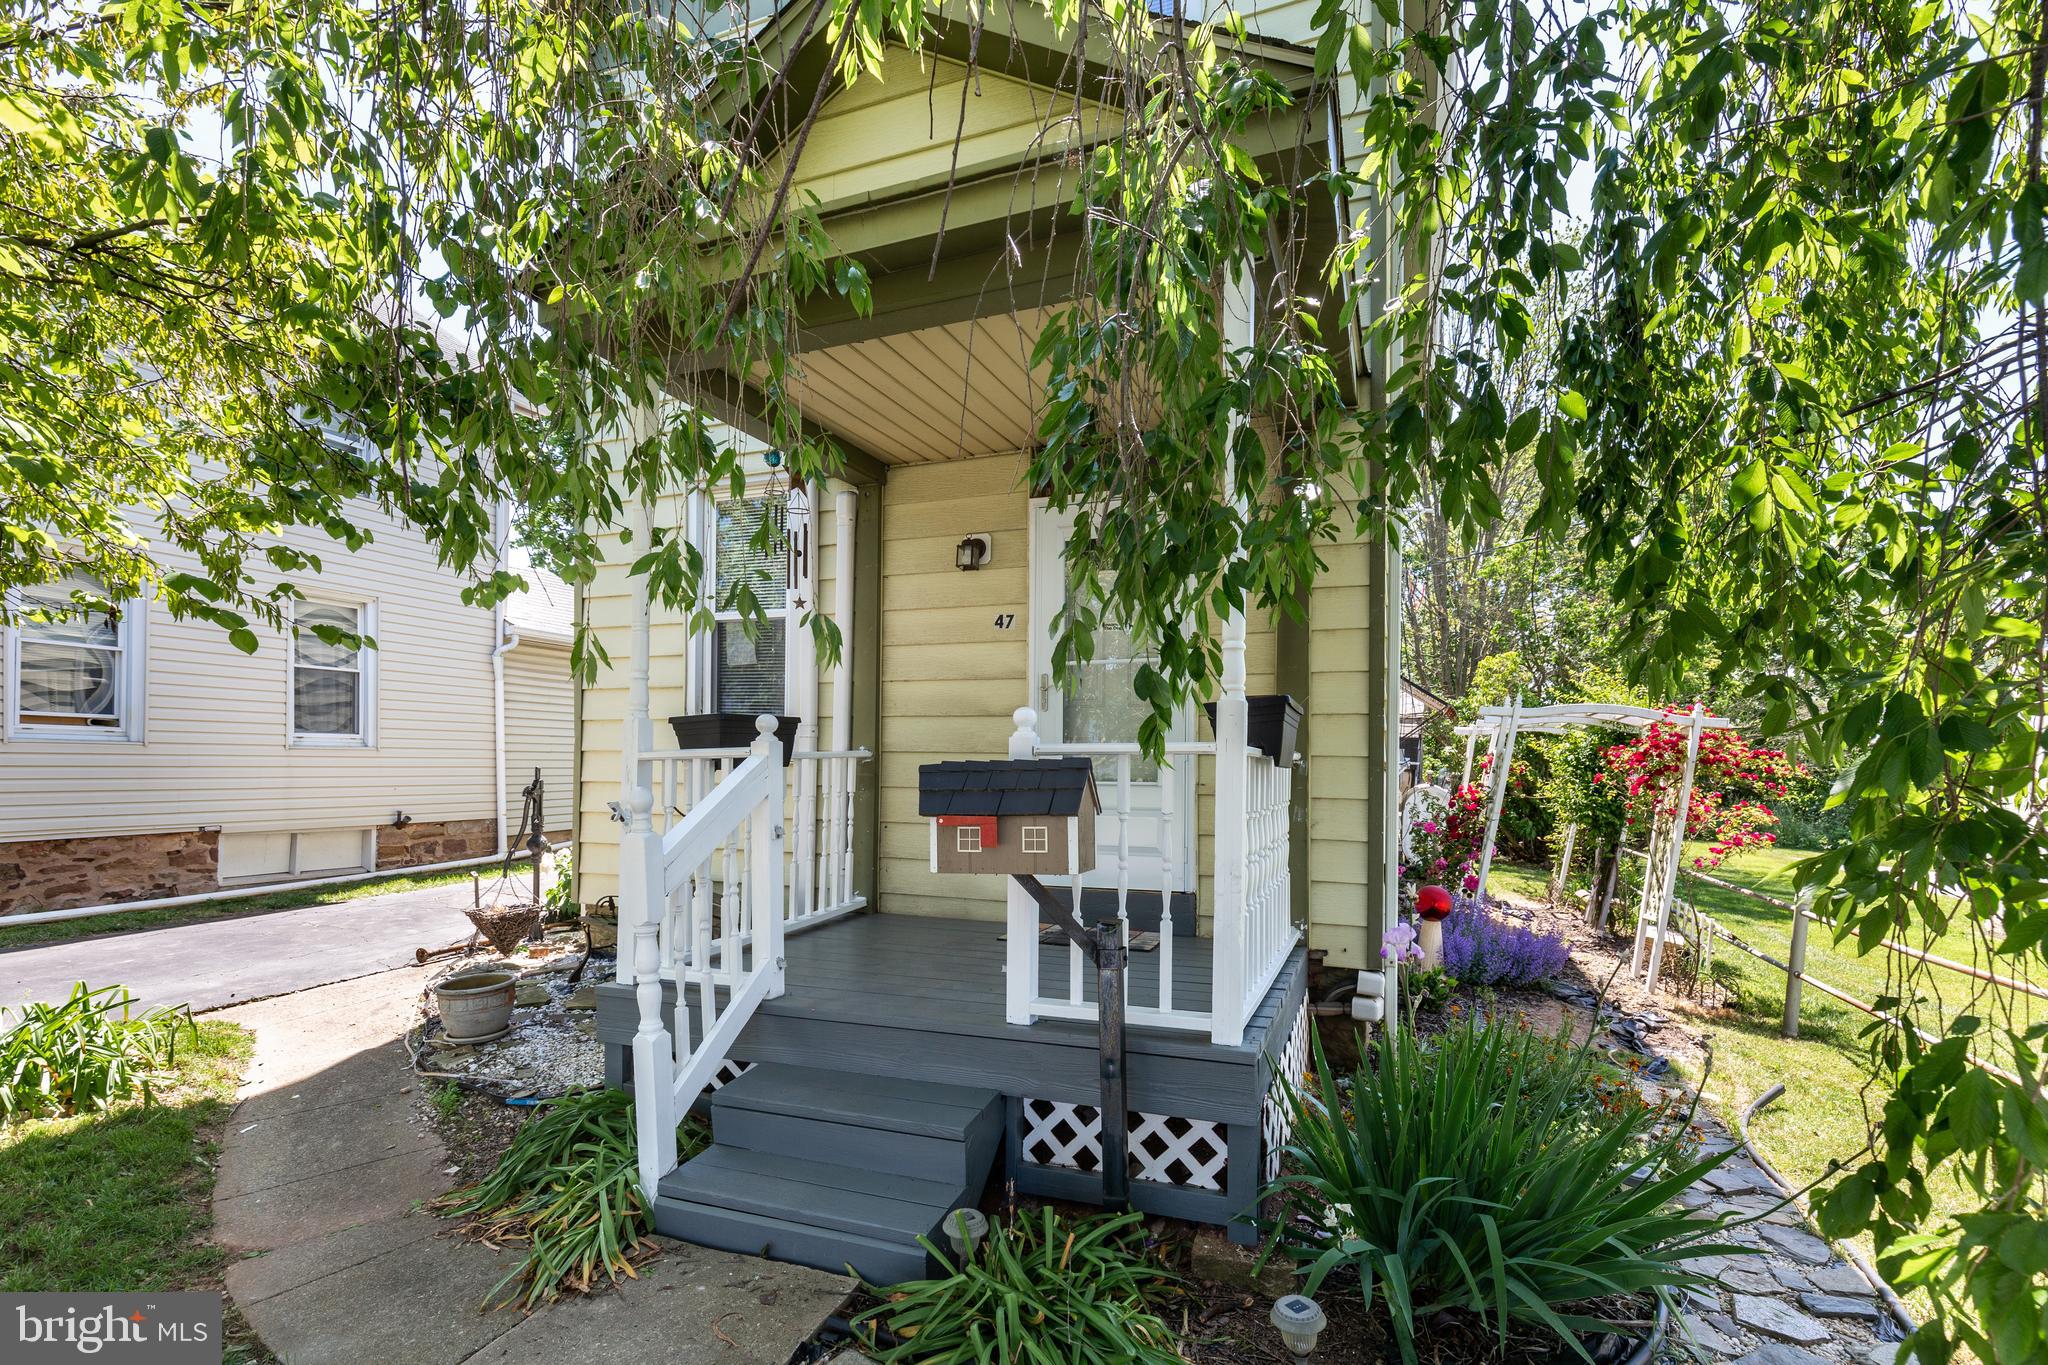 Why rent when you can buy this adorable single family home that was recently renovated, including, a